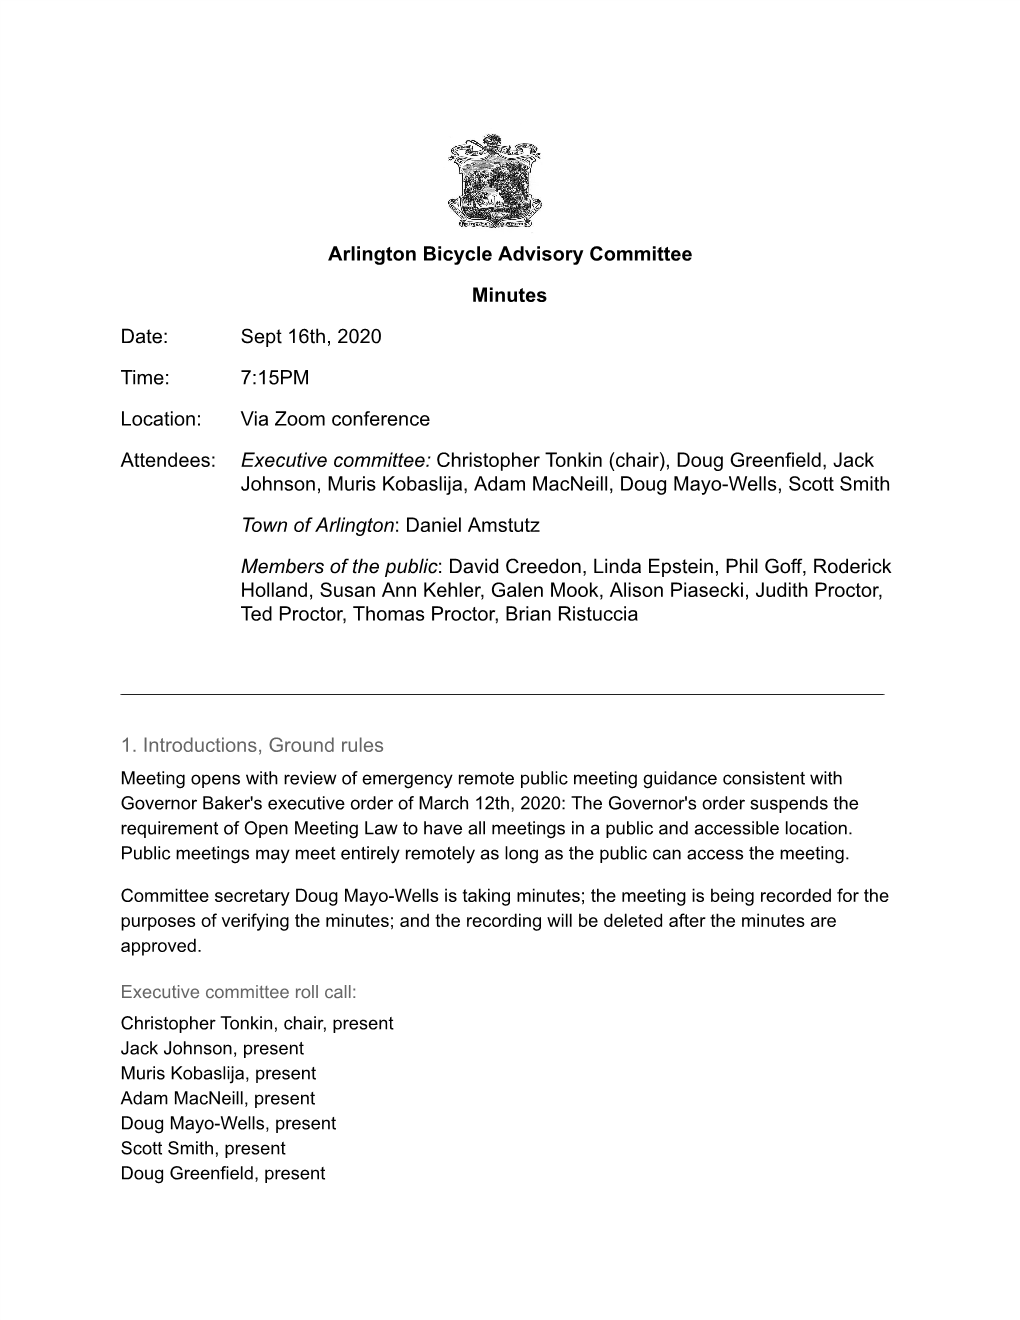 Arlington Bicycle Advisory Committee Minutes Date